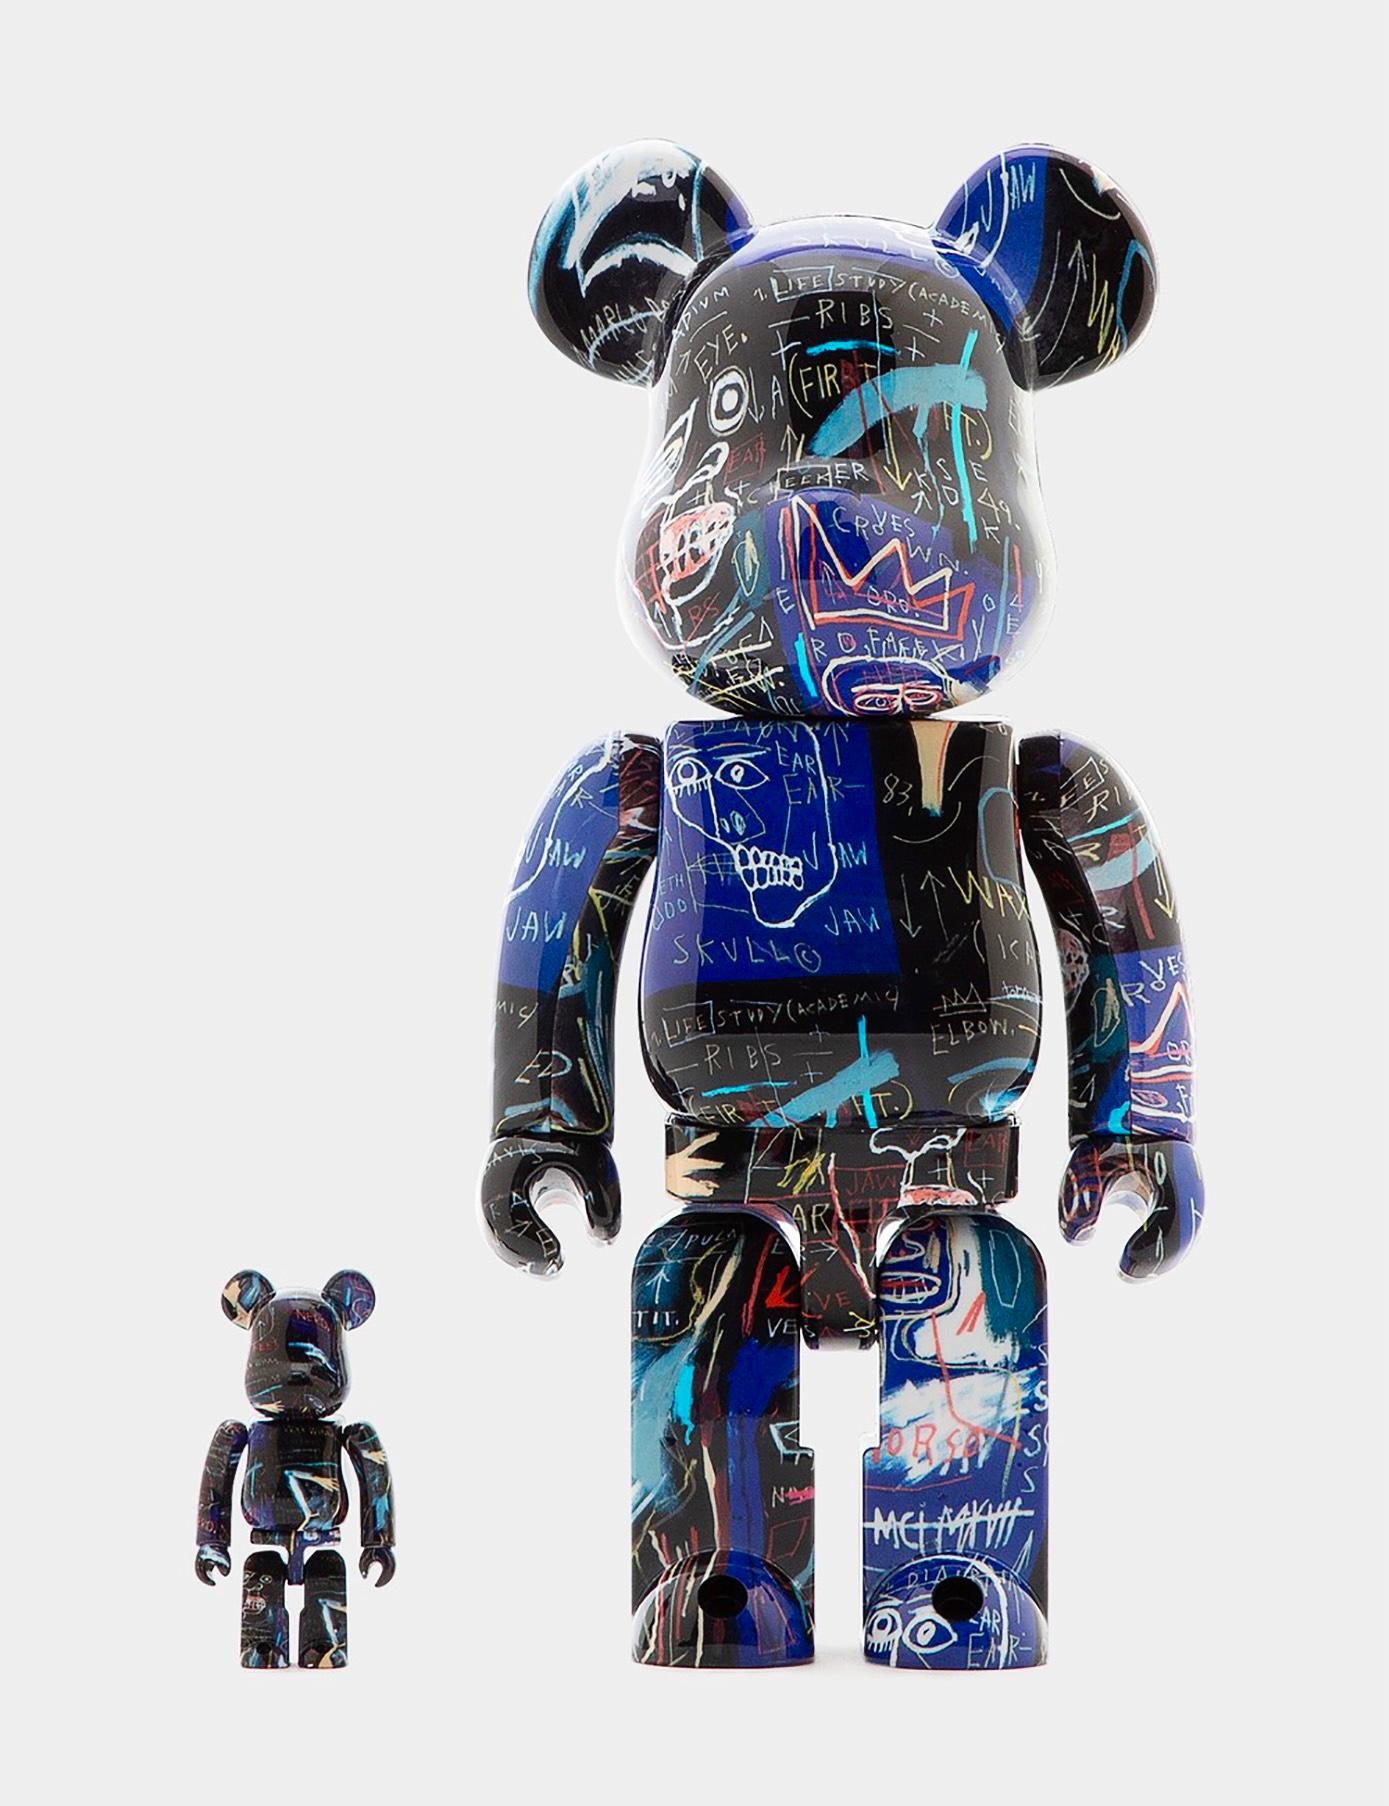 Bearbrick and Estate of Jean-Michel Basquiat Vinyl Figures: Set of two (400% & 100%):
A unique, timeless limited edition Basquiat collectible trademarked & licensed by the Estate of Jean-Michel Basquiat. The partnered collectible reveals details